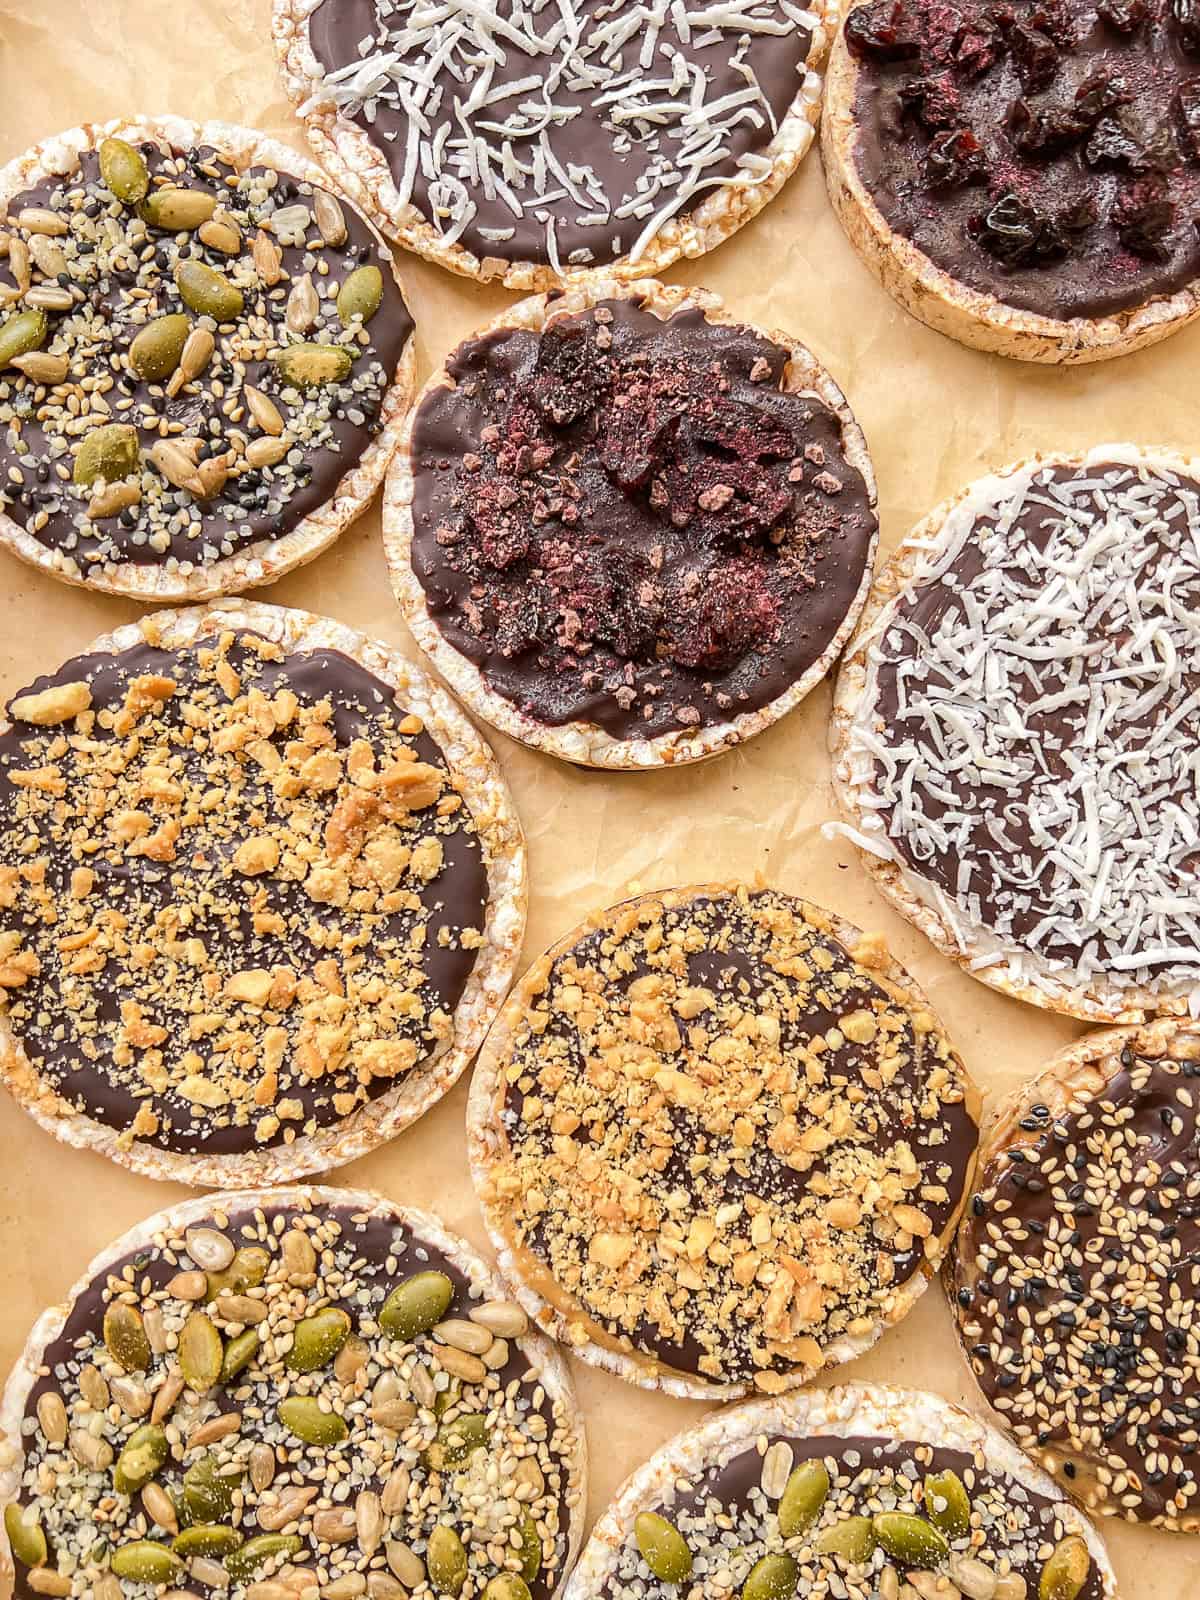 An image of a variety of homemade Chocolate Rice Cake Treats on a parchment paper lined tray.